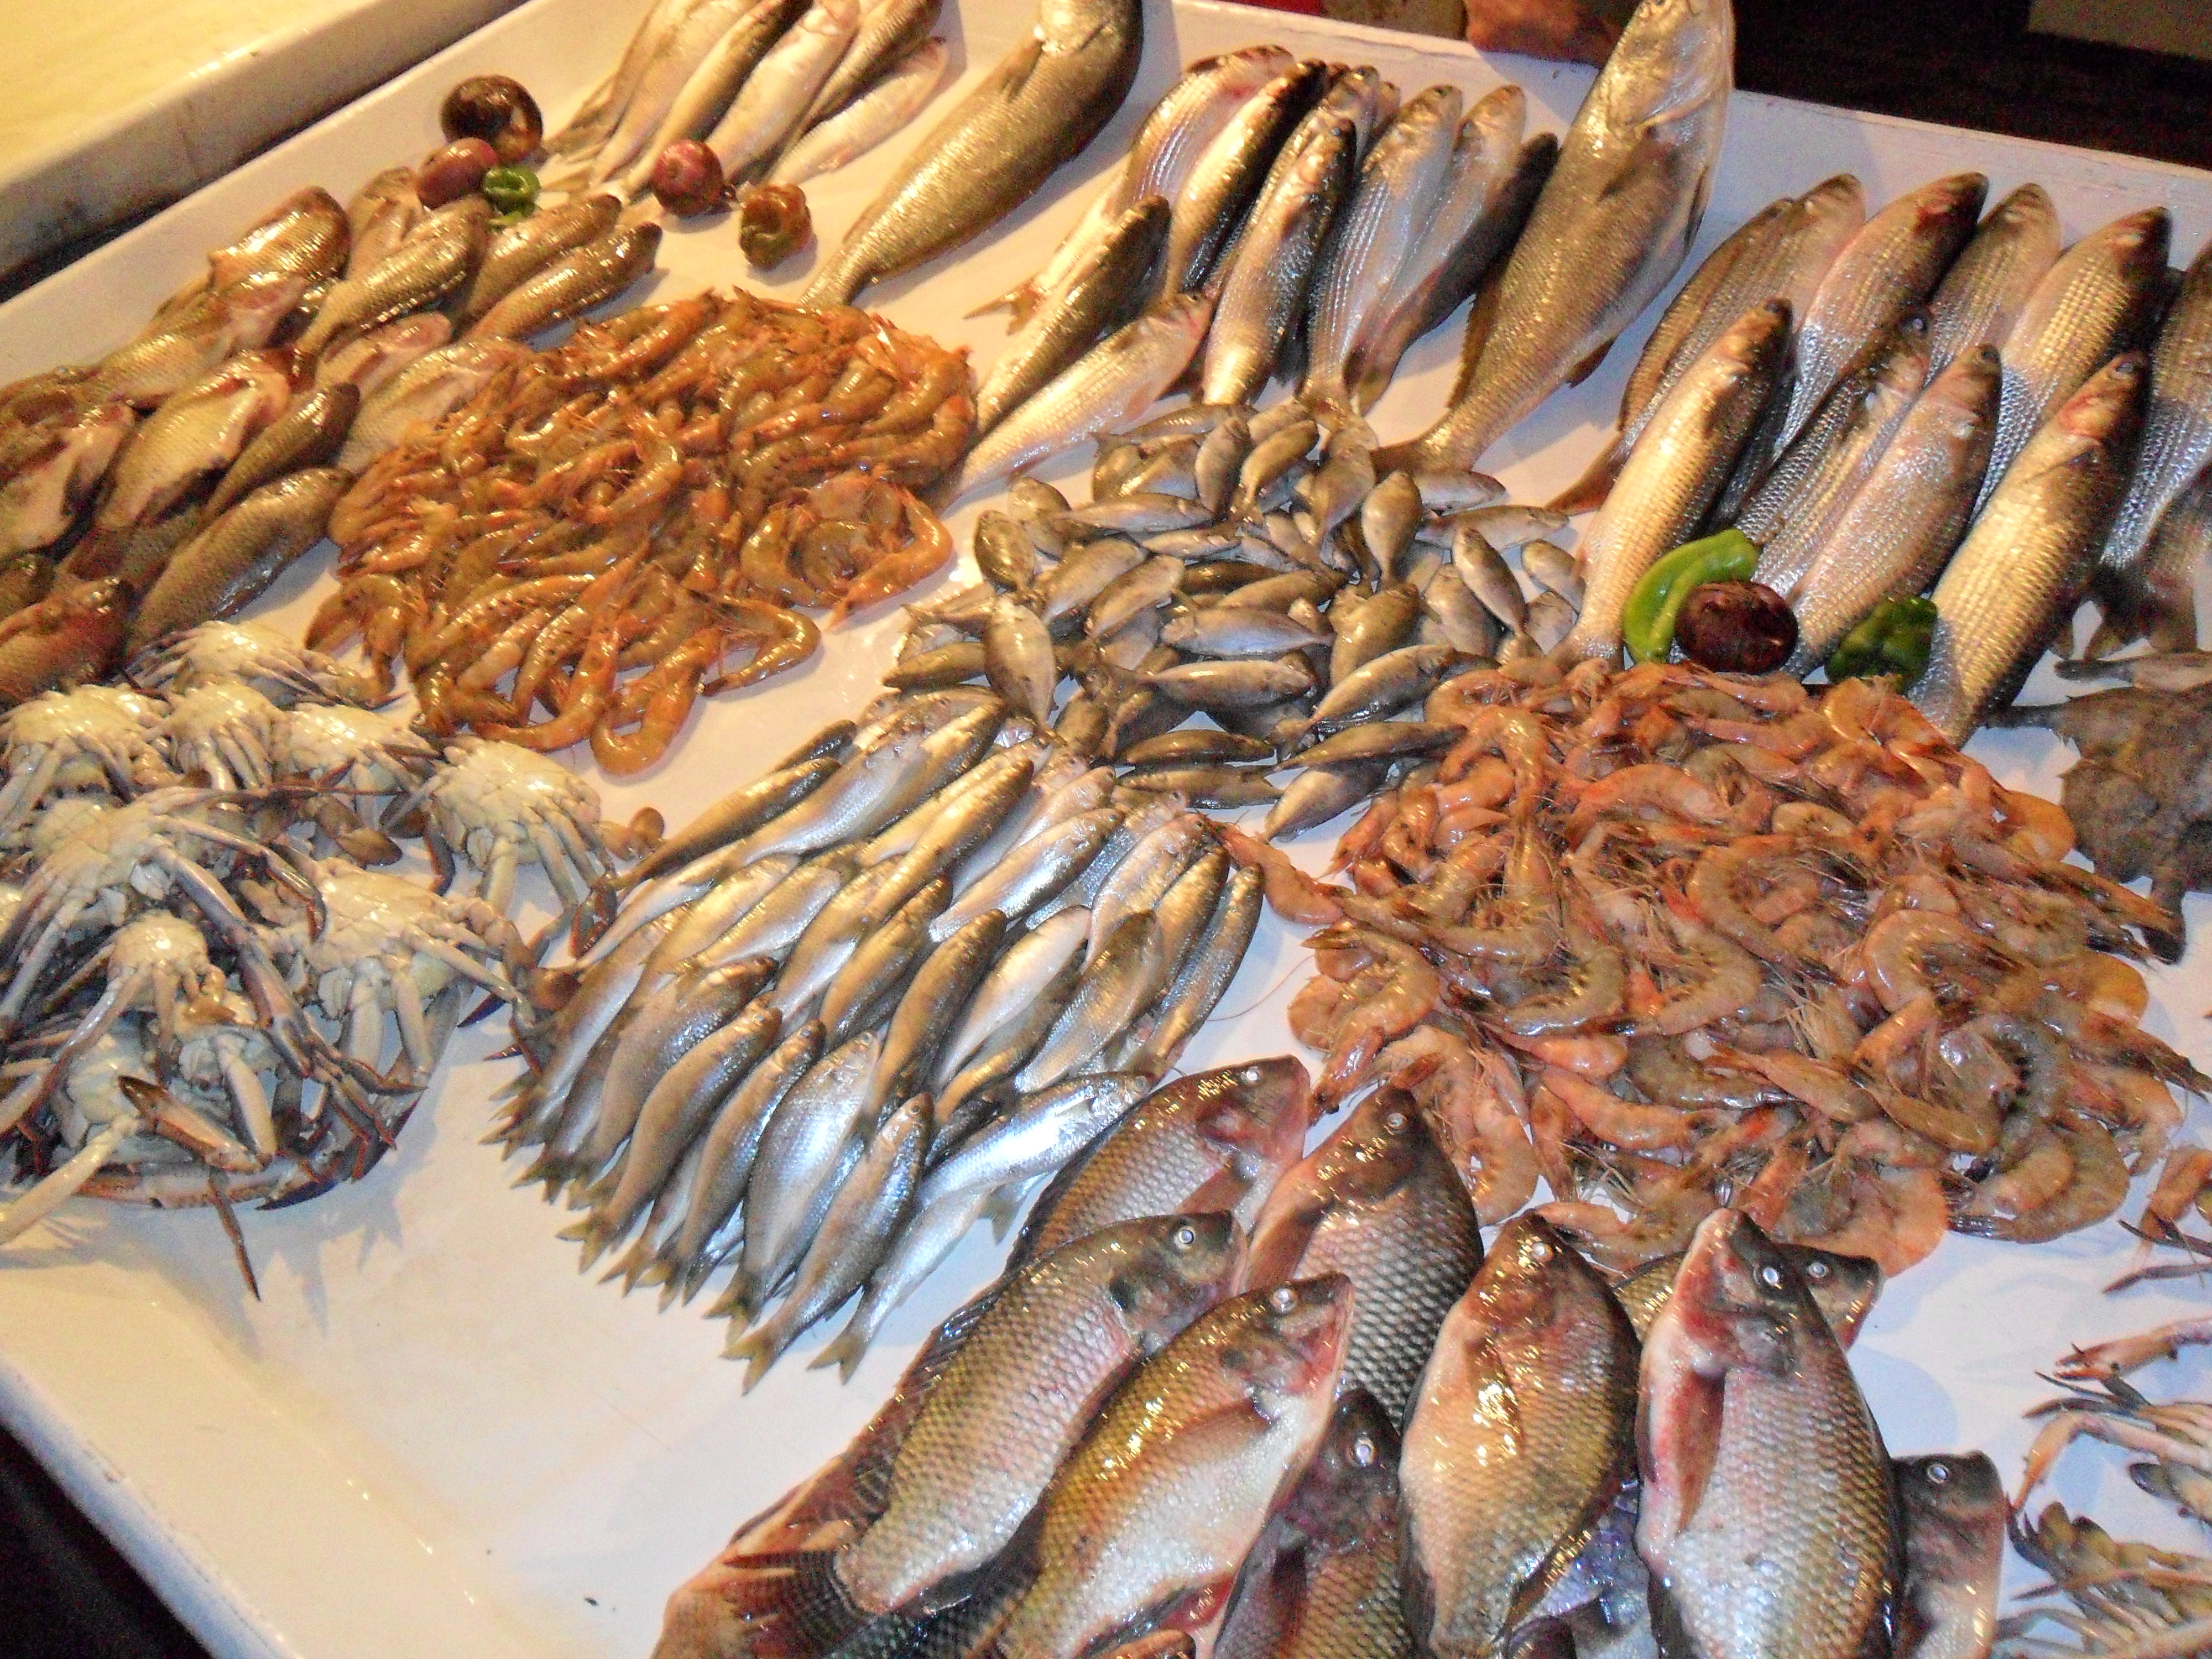 Fish display in a retail shop in Alexandria (Egypt) - Fish Consulting Group